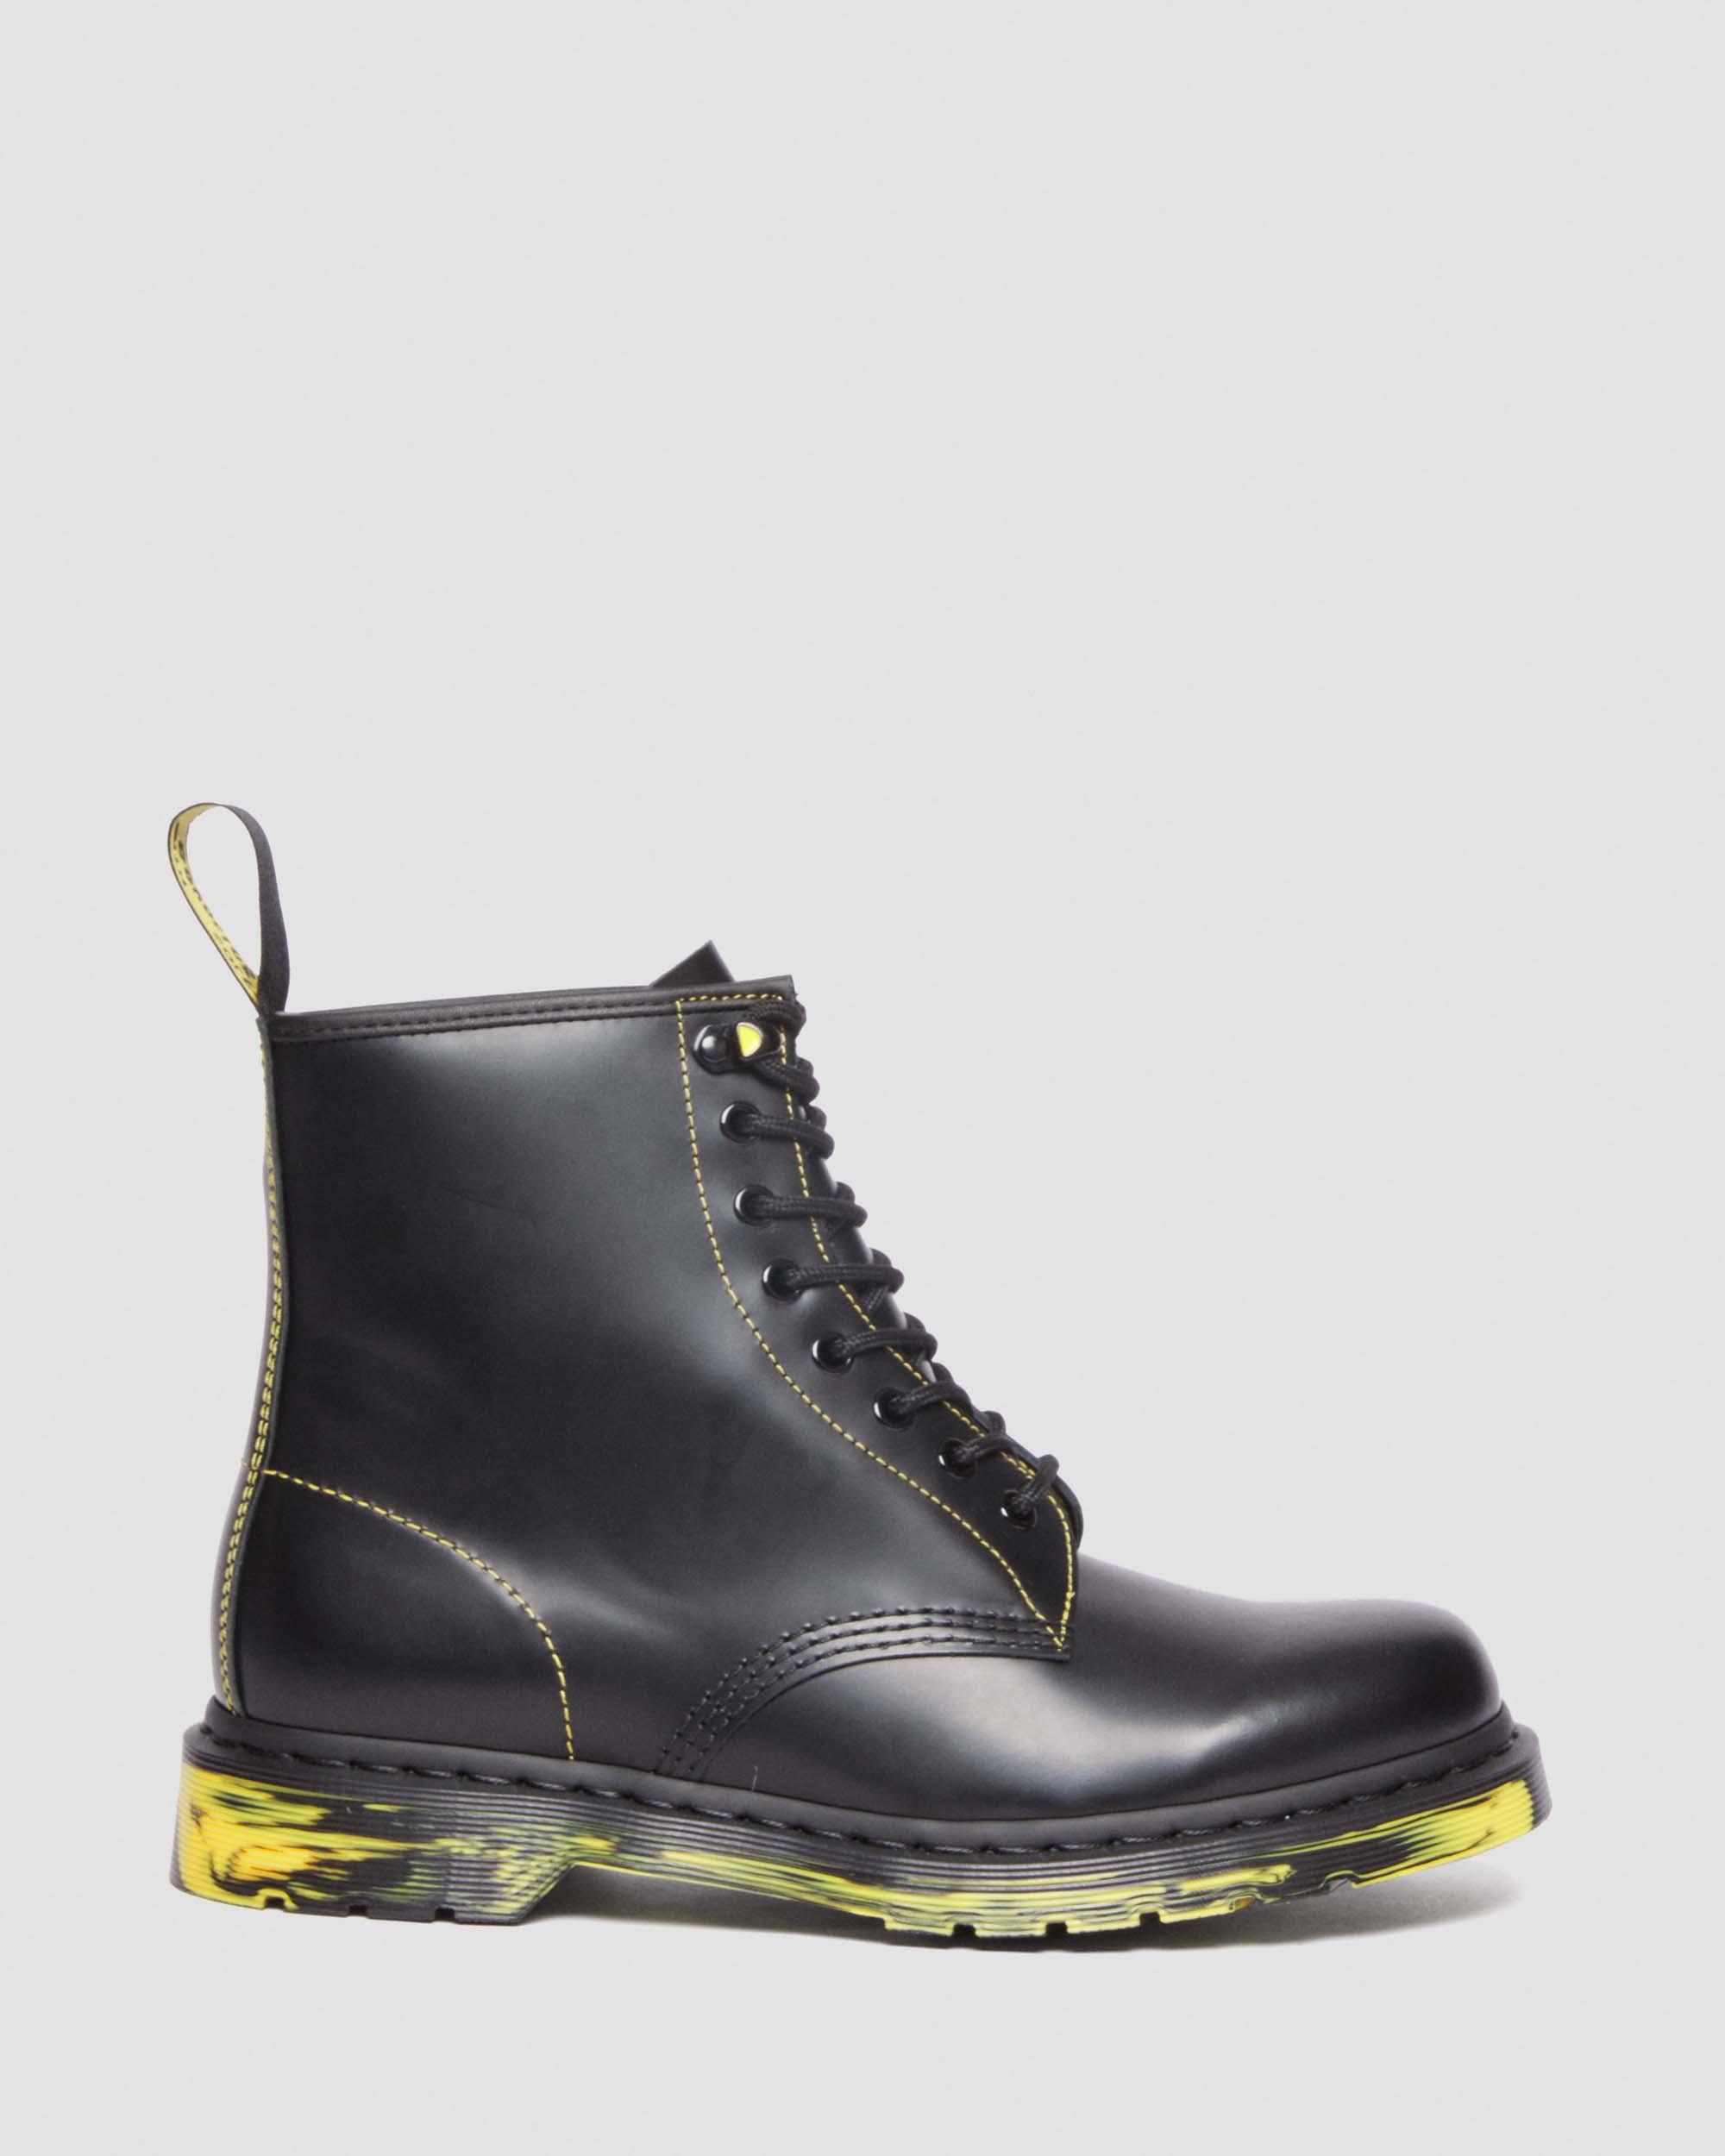 DR MARTENS 1460 Marbled Sole Smooth Leather Lace Up Boots